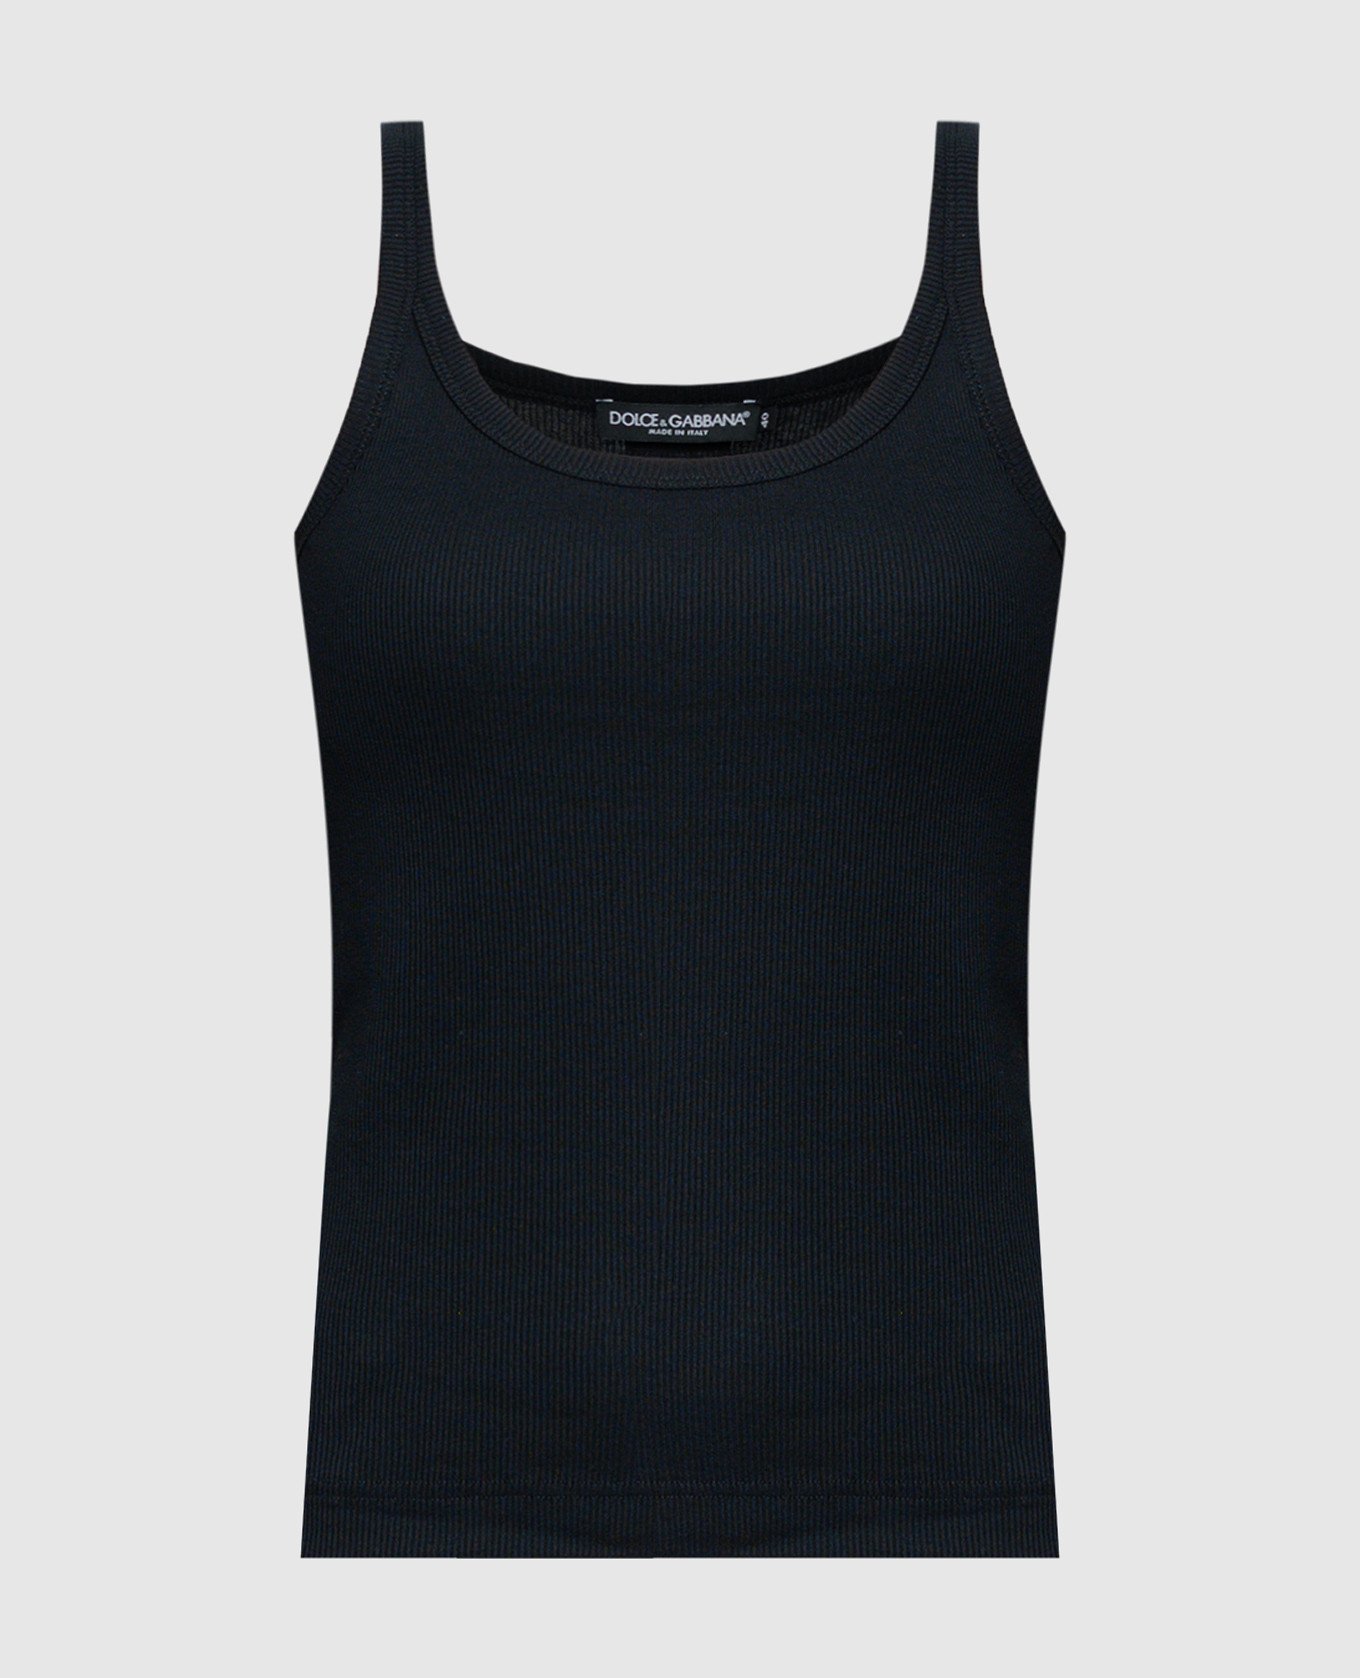 Black top with logo patch